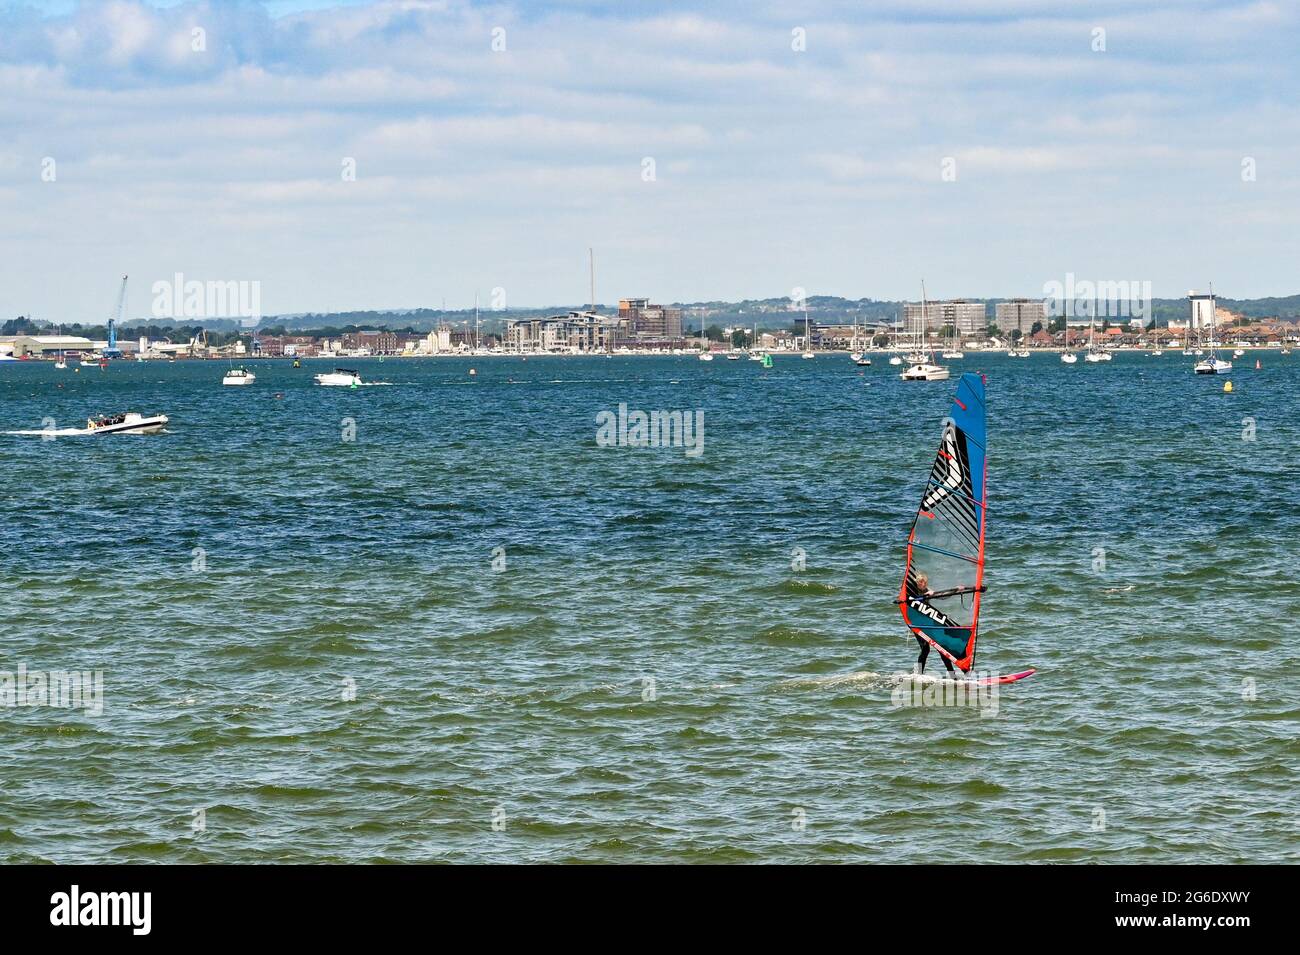 Poole, England - June 2021: Windsurfer on choppy water in Poole harbour. Stock Photo